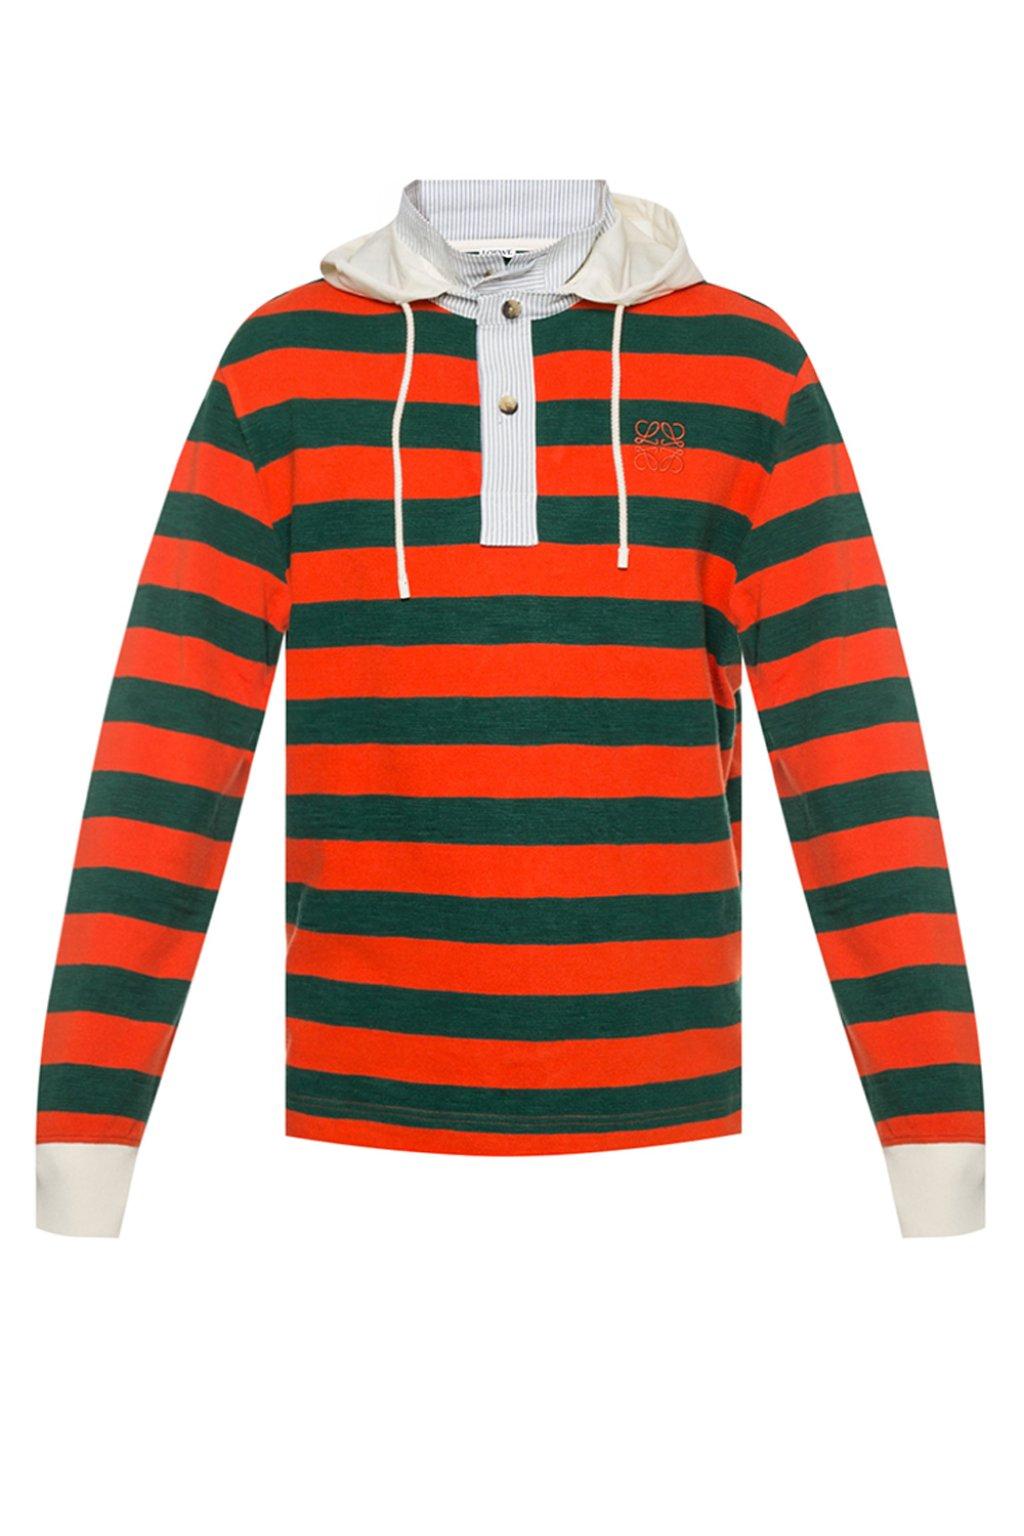 Loewe Cotton Striped Sweater in Red for Men - Lyst